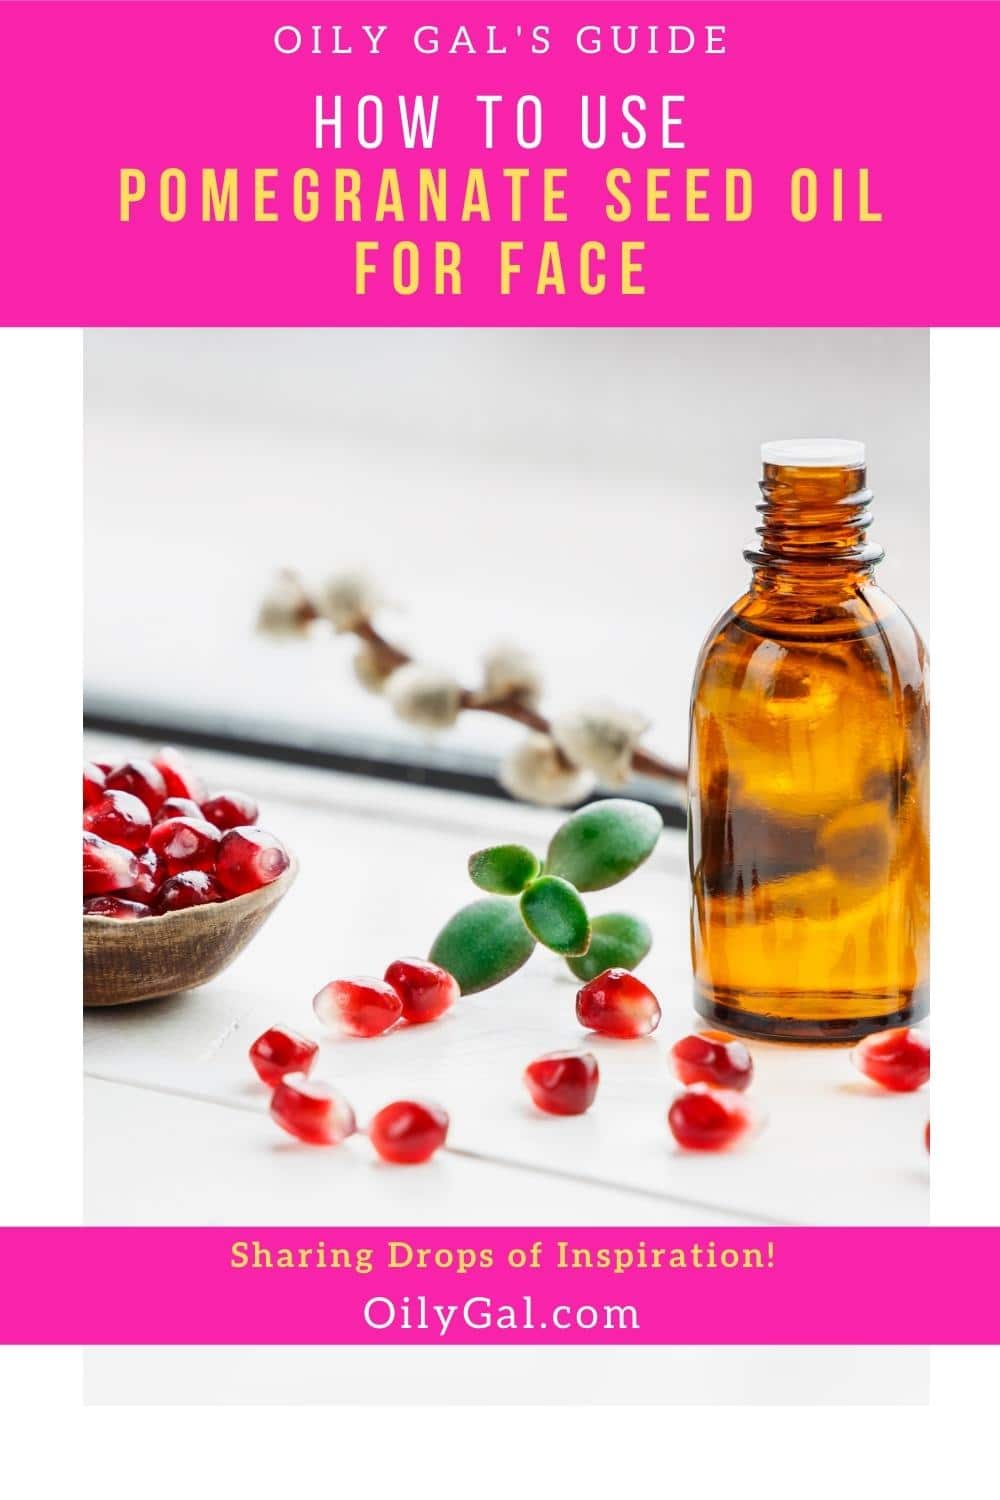 How to Use Pomegranate Seed Oil for Face